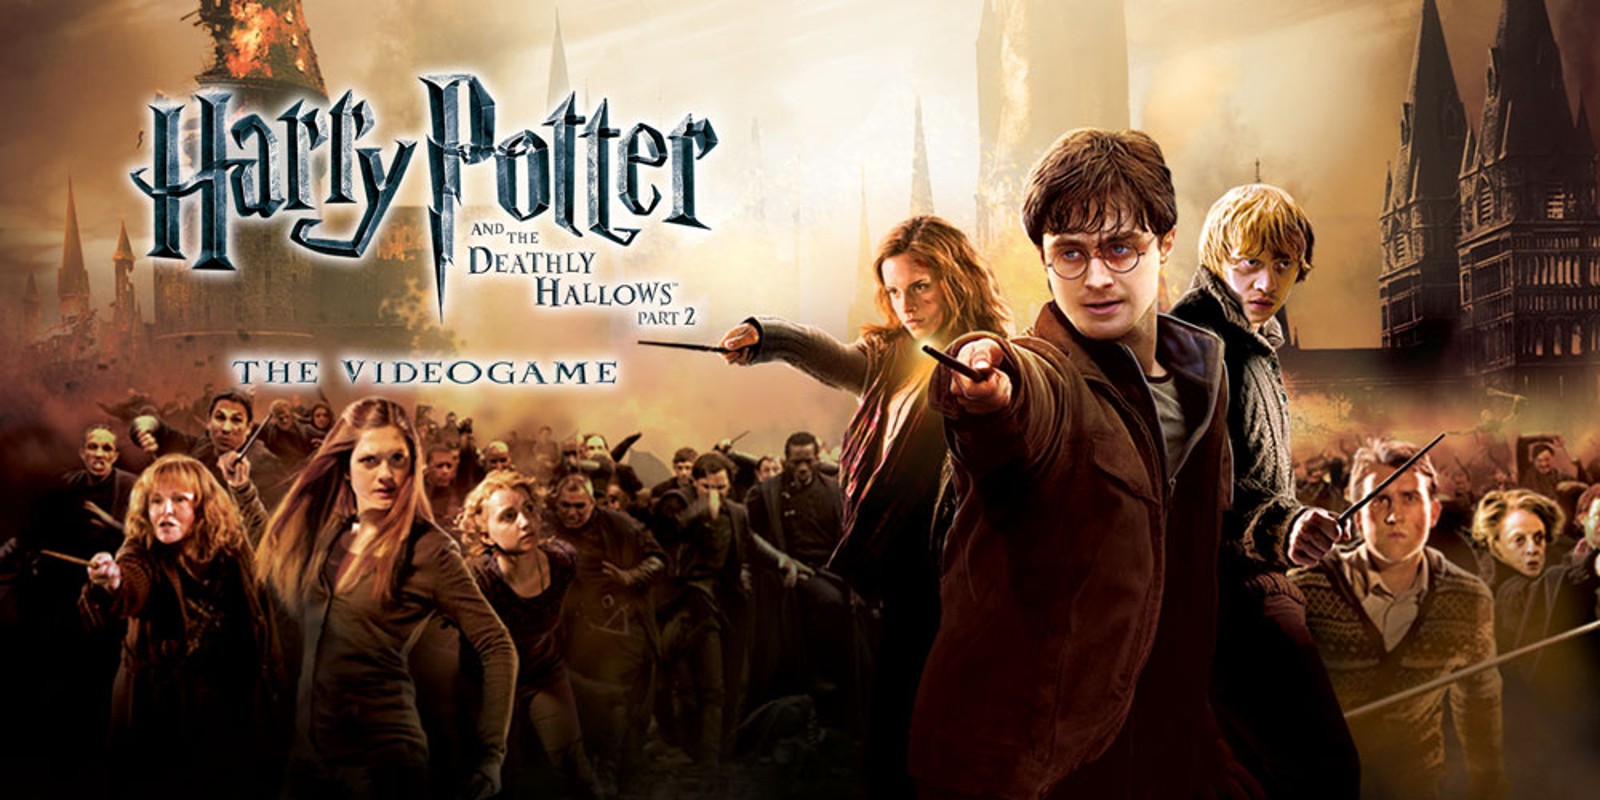 potter and the deathly hallows part 2 download